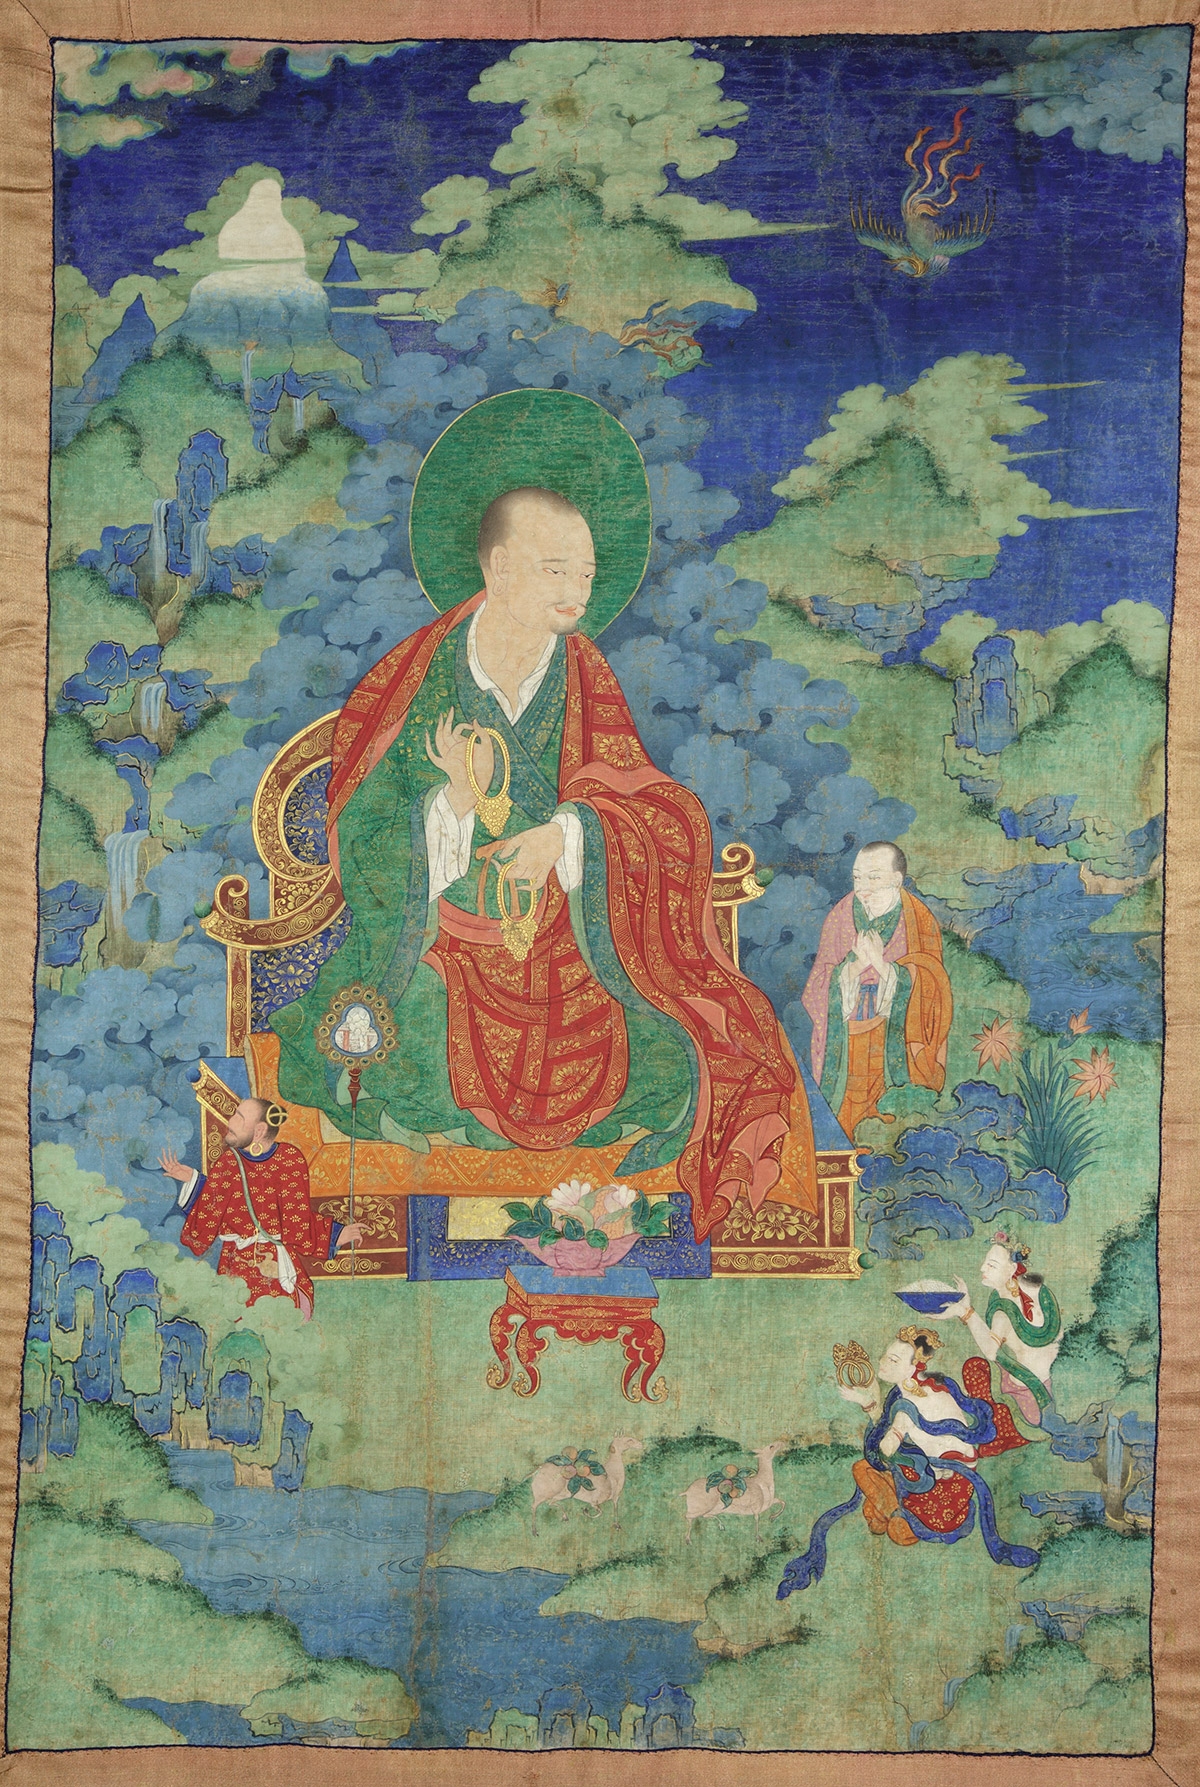 Kalika Arhat. 17th century. Possibly Kham (East Tibet). Tradition: Gelug. Pigments on cloth. MU-CIV/MAO "Giuseppe Tucci," inv. 925/758. Placement as indicated on verso: 4th from right. Image courtesy of the Museum of Civilisation/Museum of Oriental Art "Giuseppe Tucci," Rome.